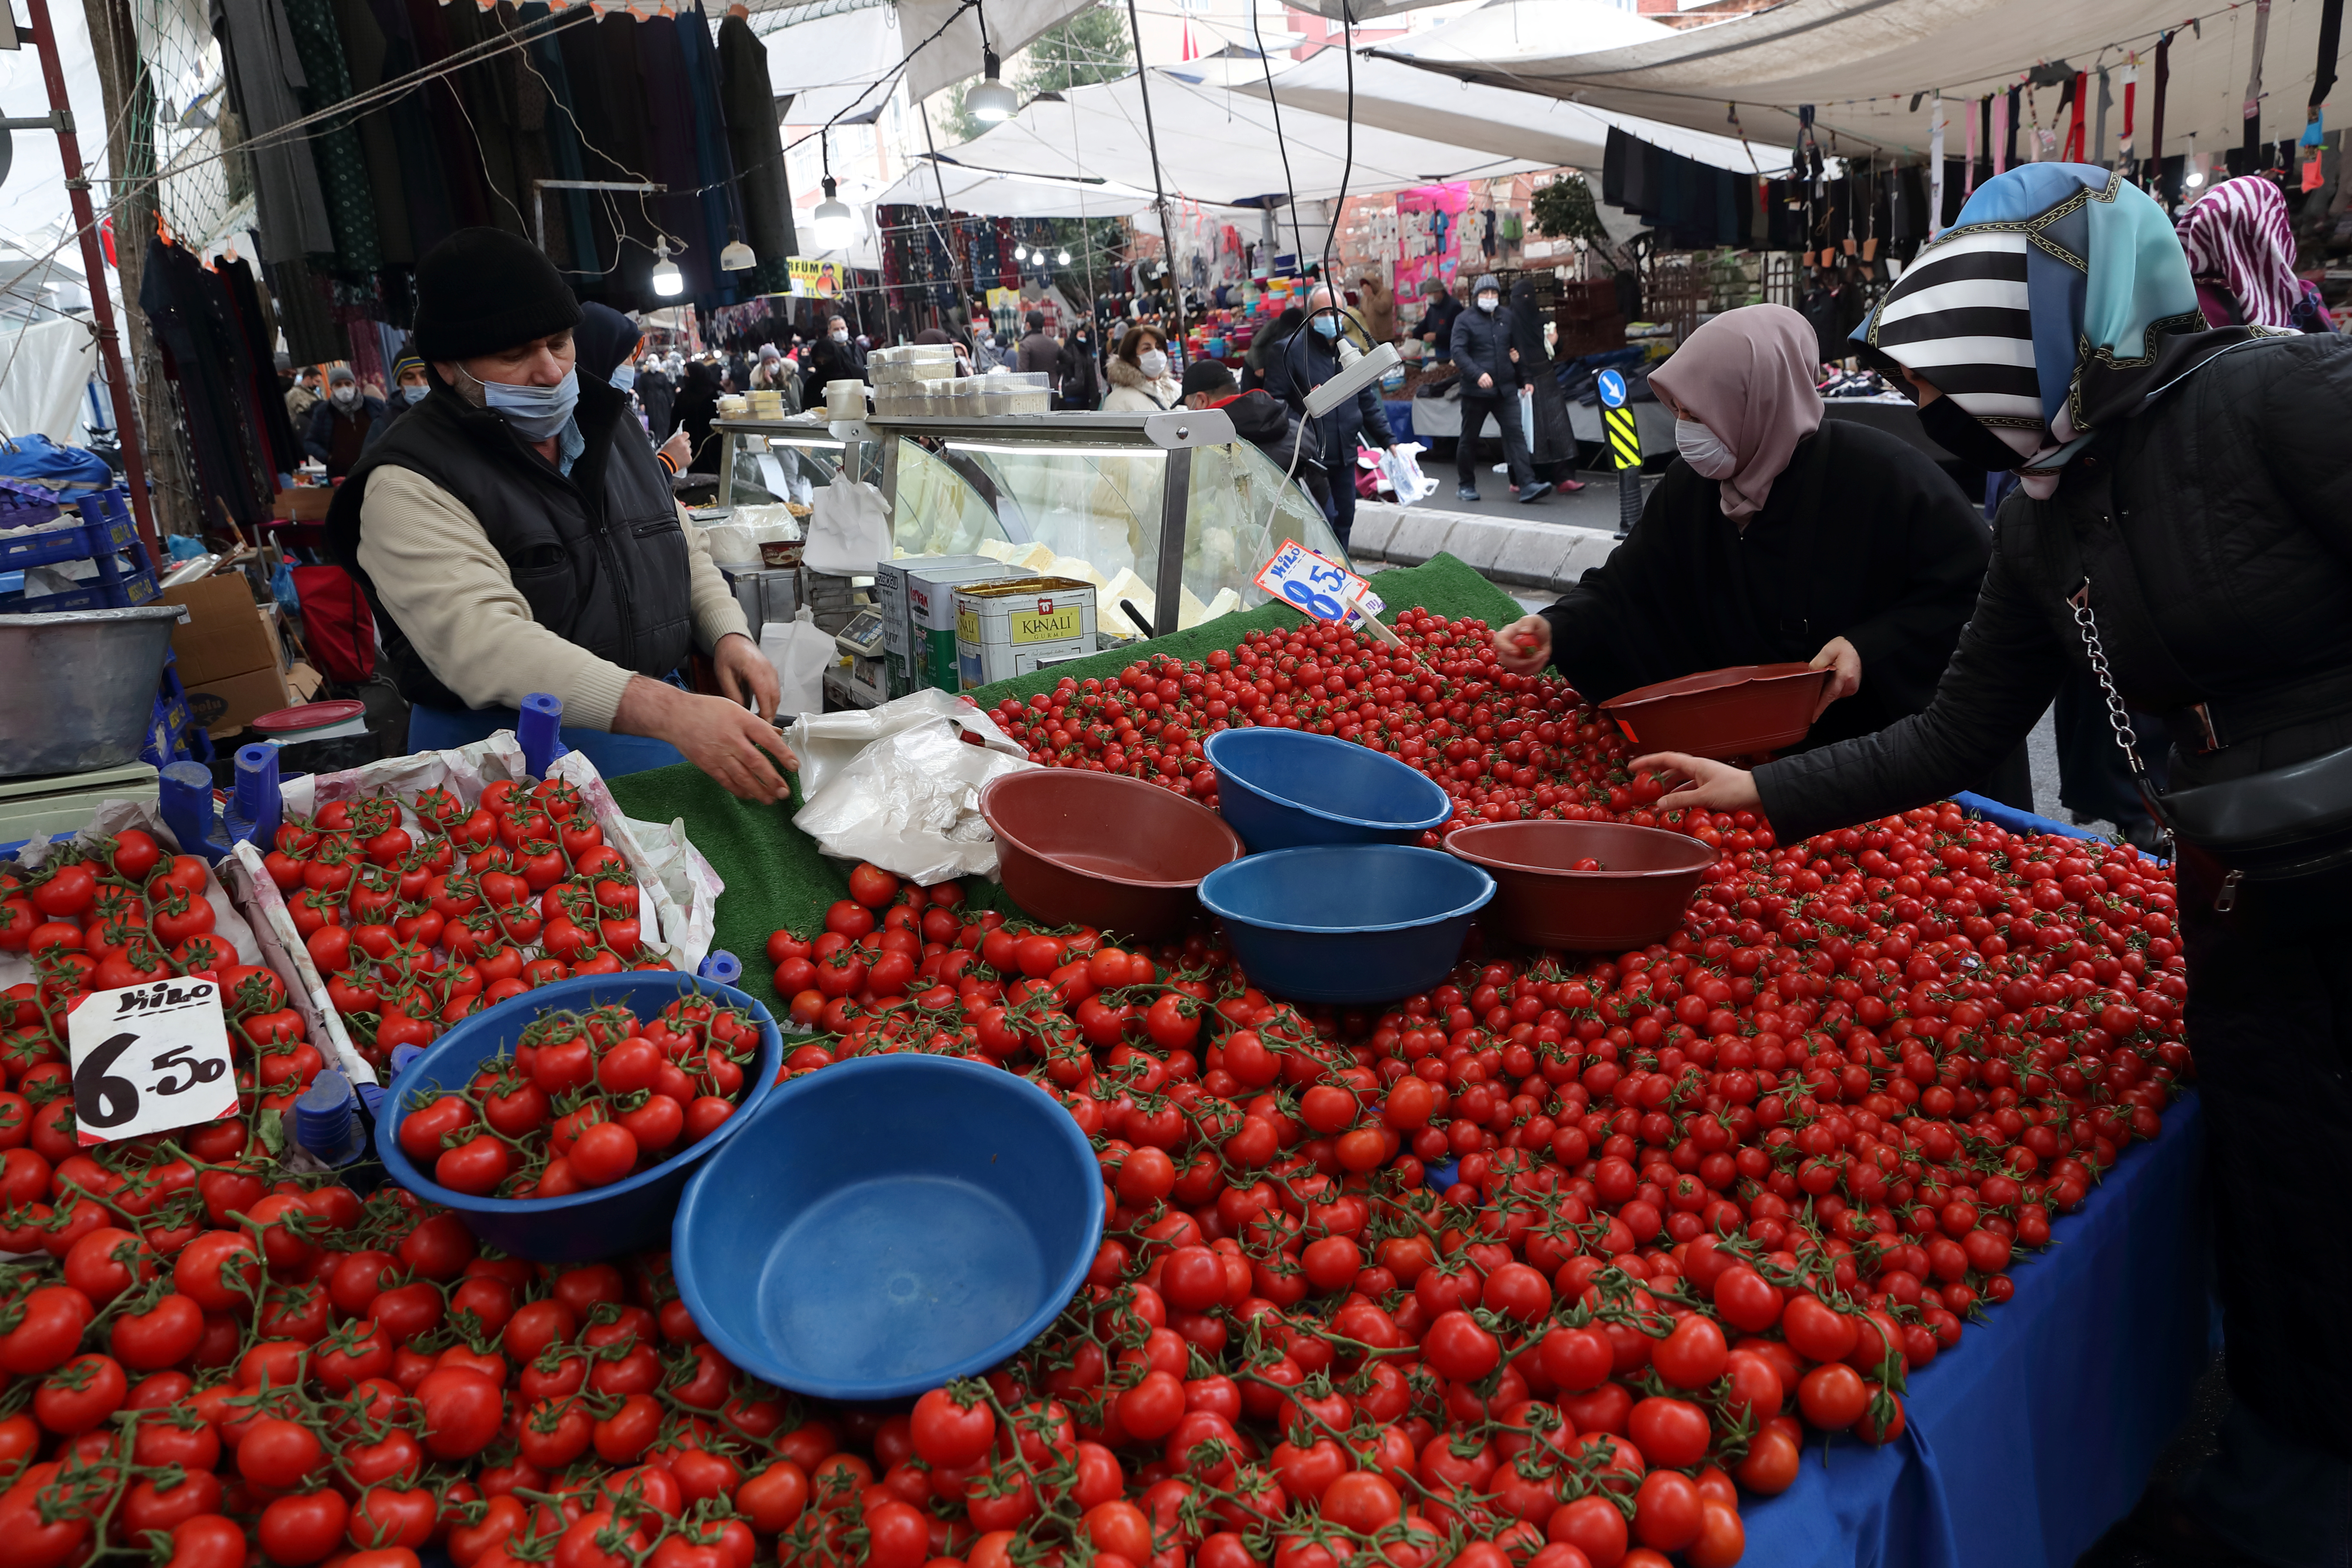 Women shop at a local market in Fatih district in Istanbul, Turkey January 13, 2021. REUTERS/Murad Sezer